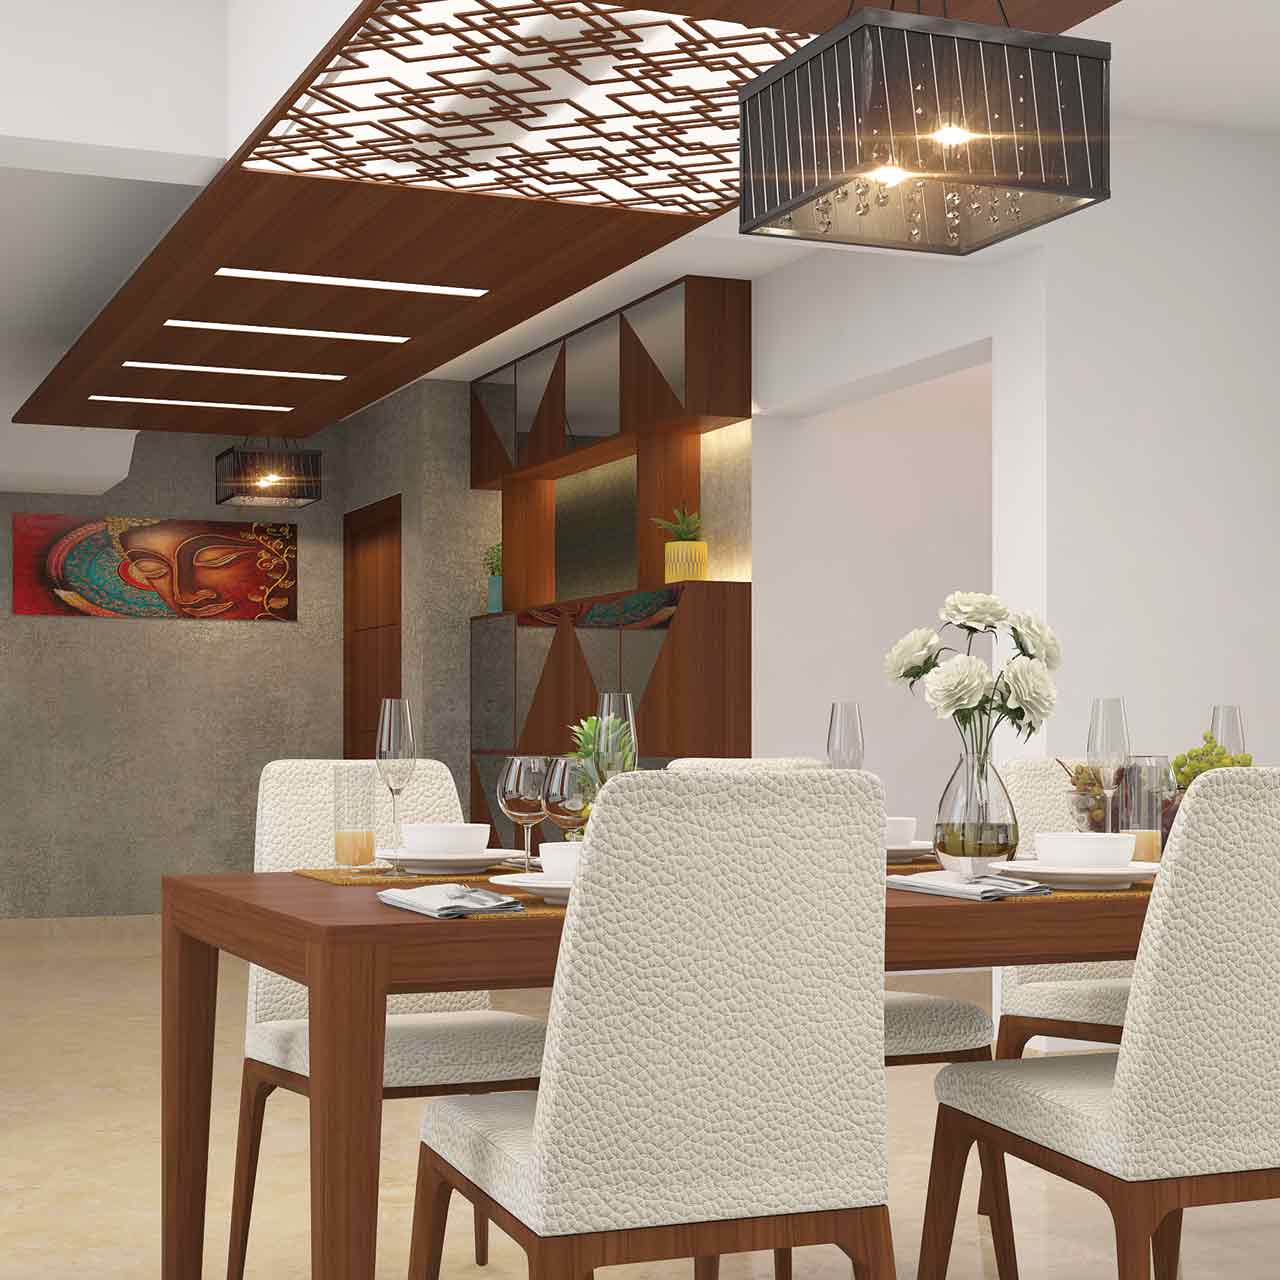 Dining room interior design where you can install a chandelier directly over the table of dining table in living room